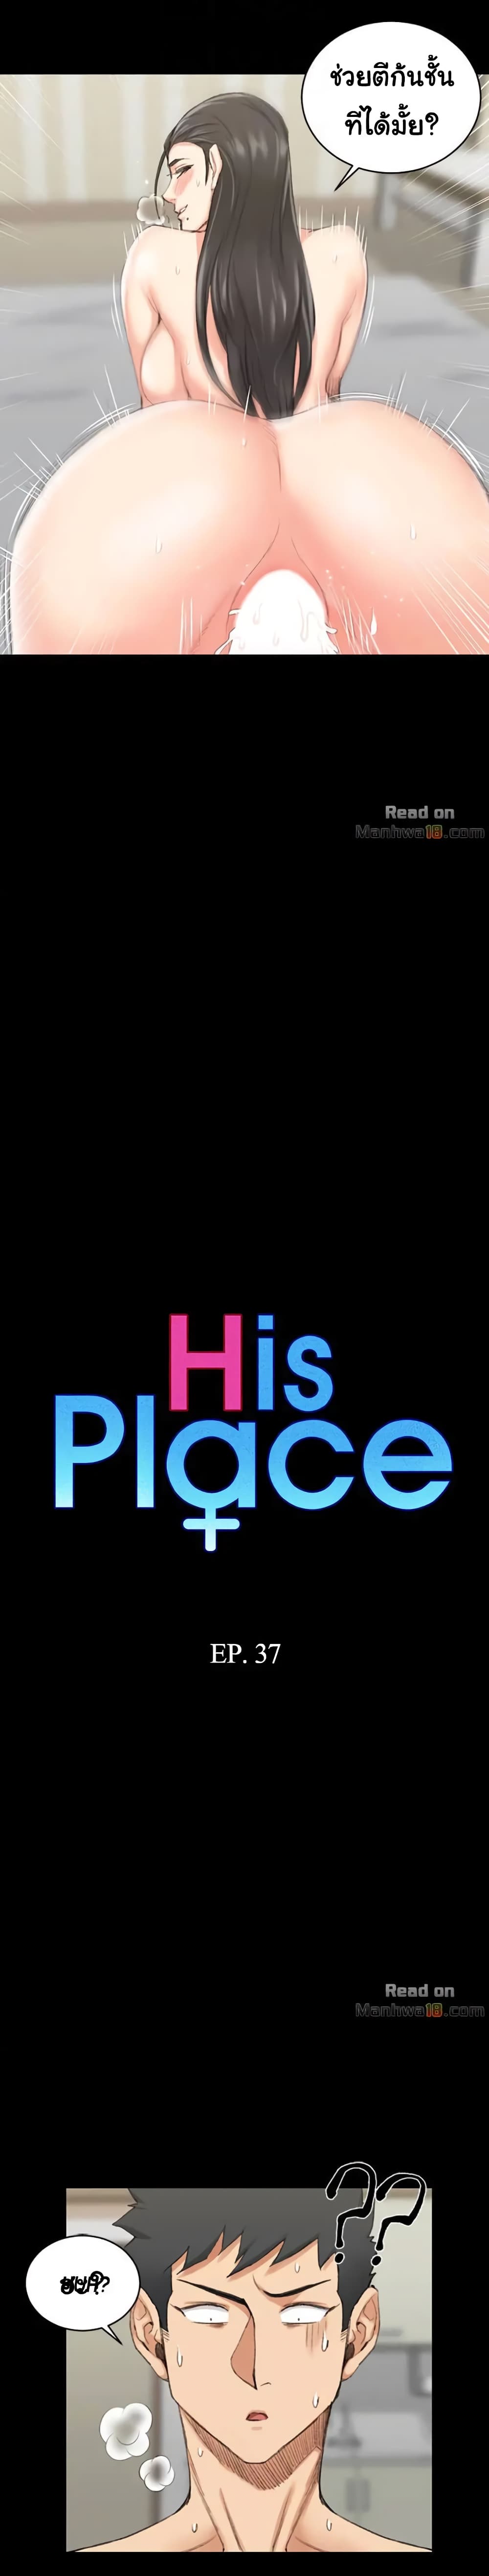 His Place 37 (2)